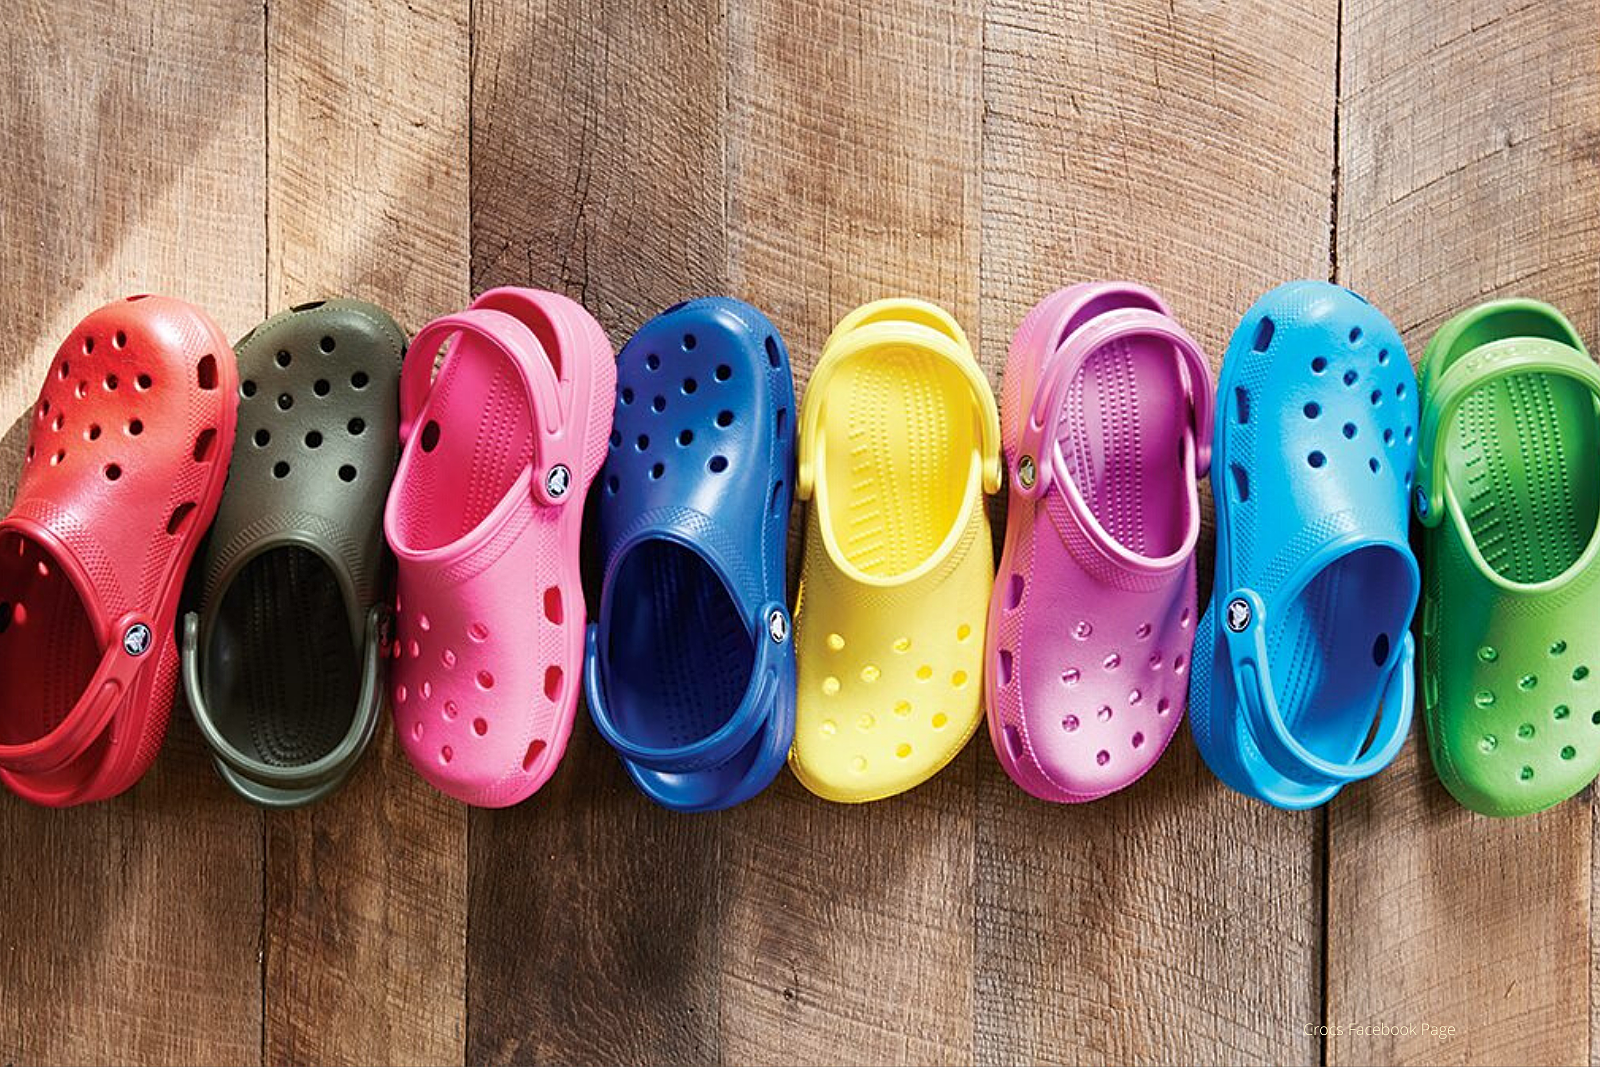 free crocs for healthcare worker